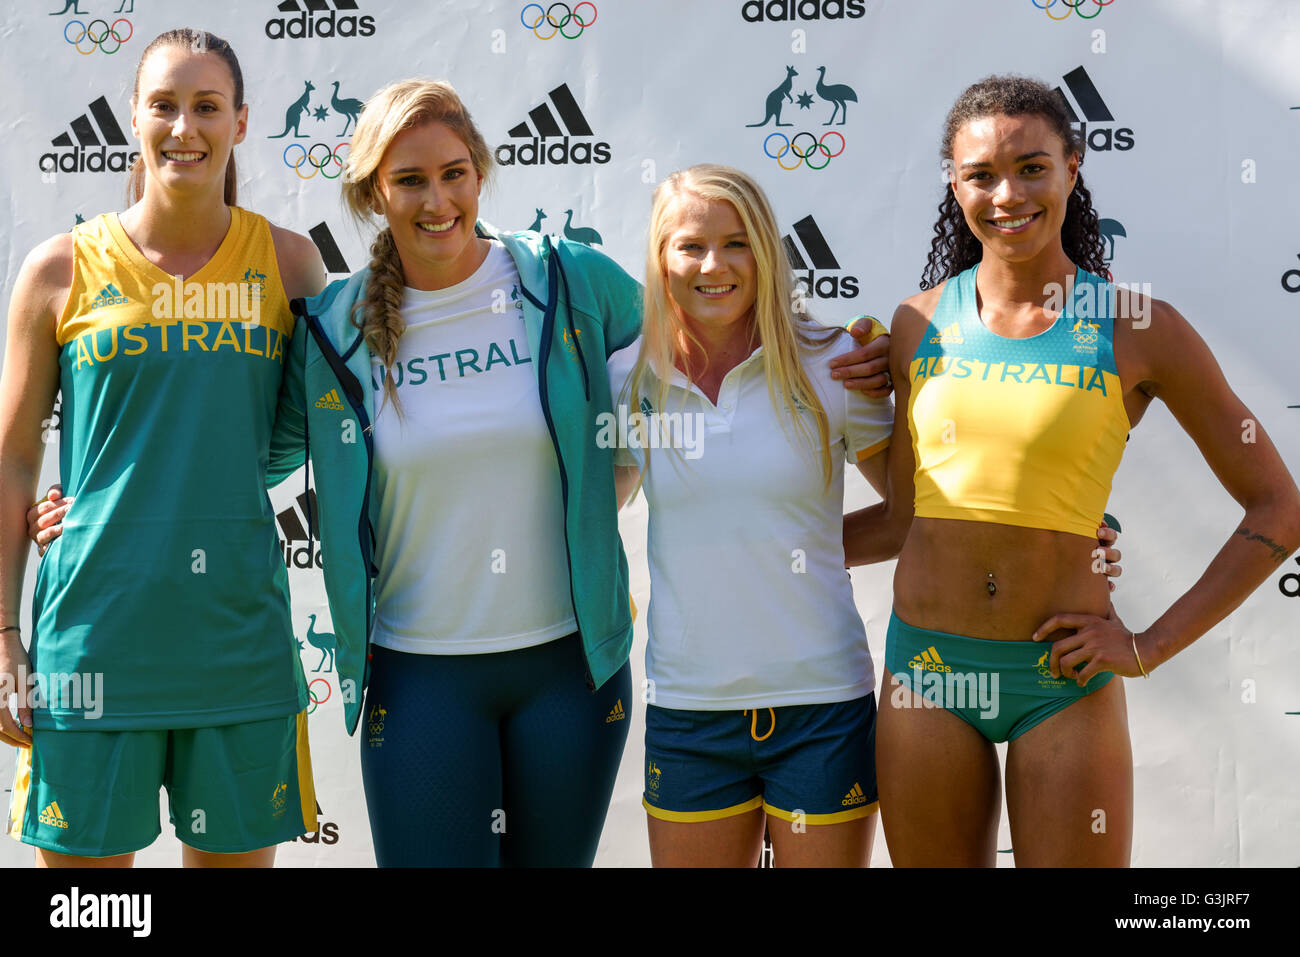 Sydney, Australia. 19th Apr, 2016. Adidas and the Australian Olympic  Committee joined by Australian Olympic athletes and Rio hopefuls including  Sally Pearson, Kyle Chalmers, Madison Wilson, Morgan Mitchell, Brooke  Stratton, Holly Lincoln-Smith,